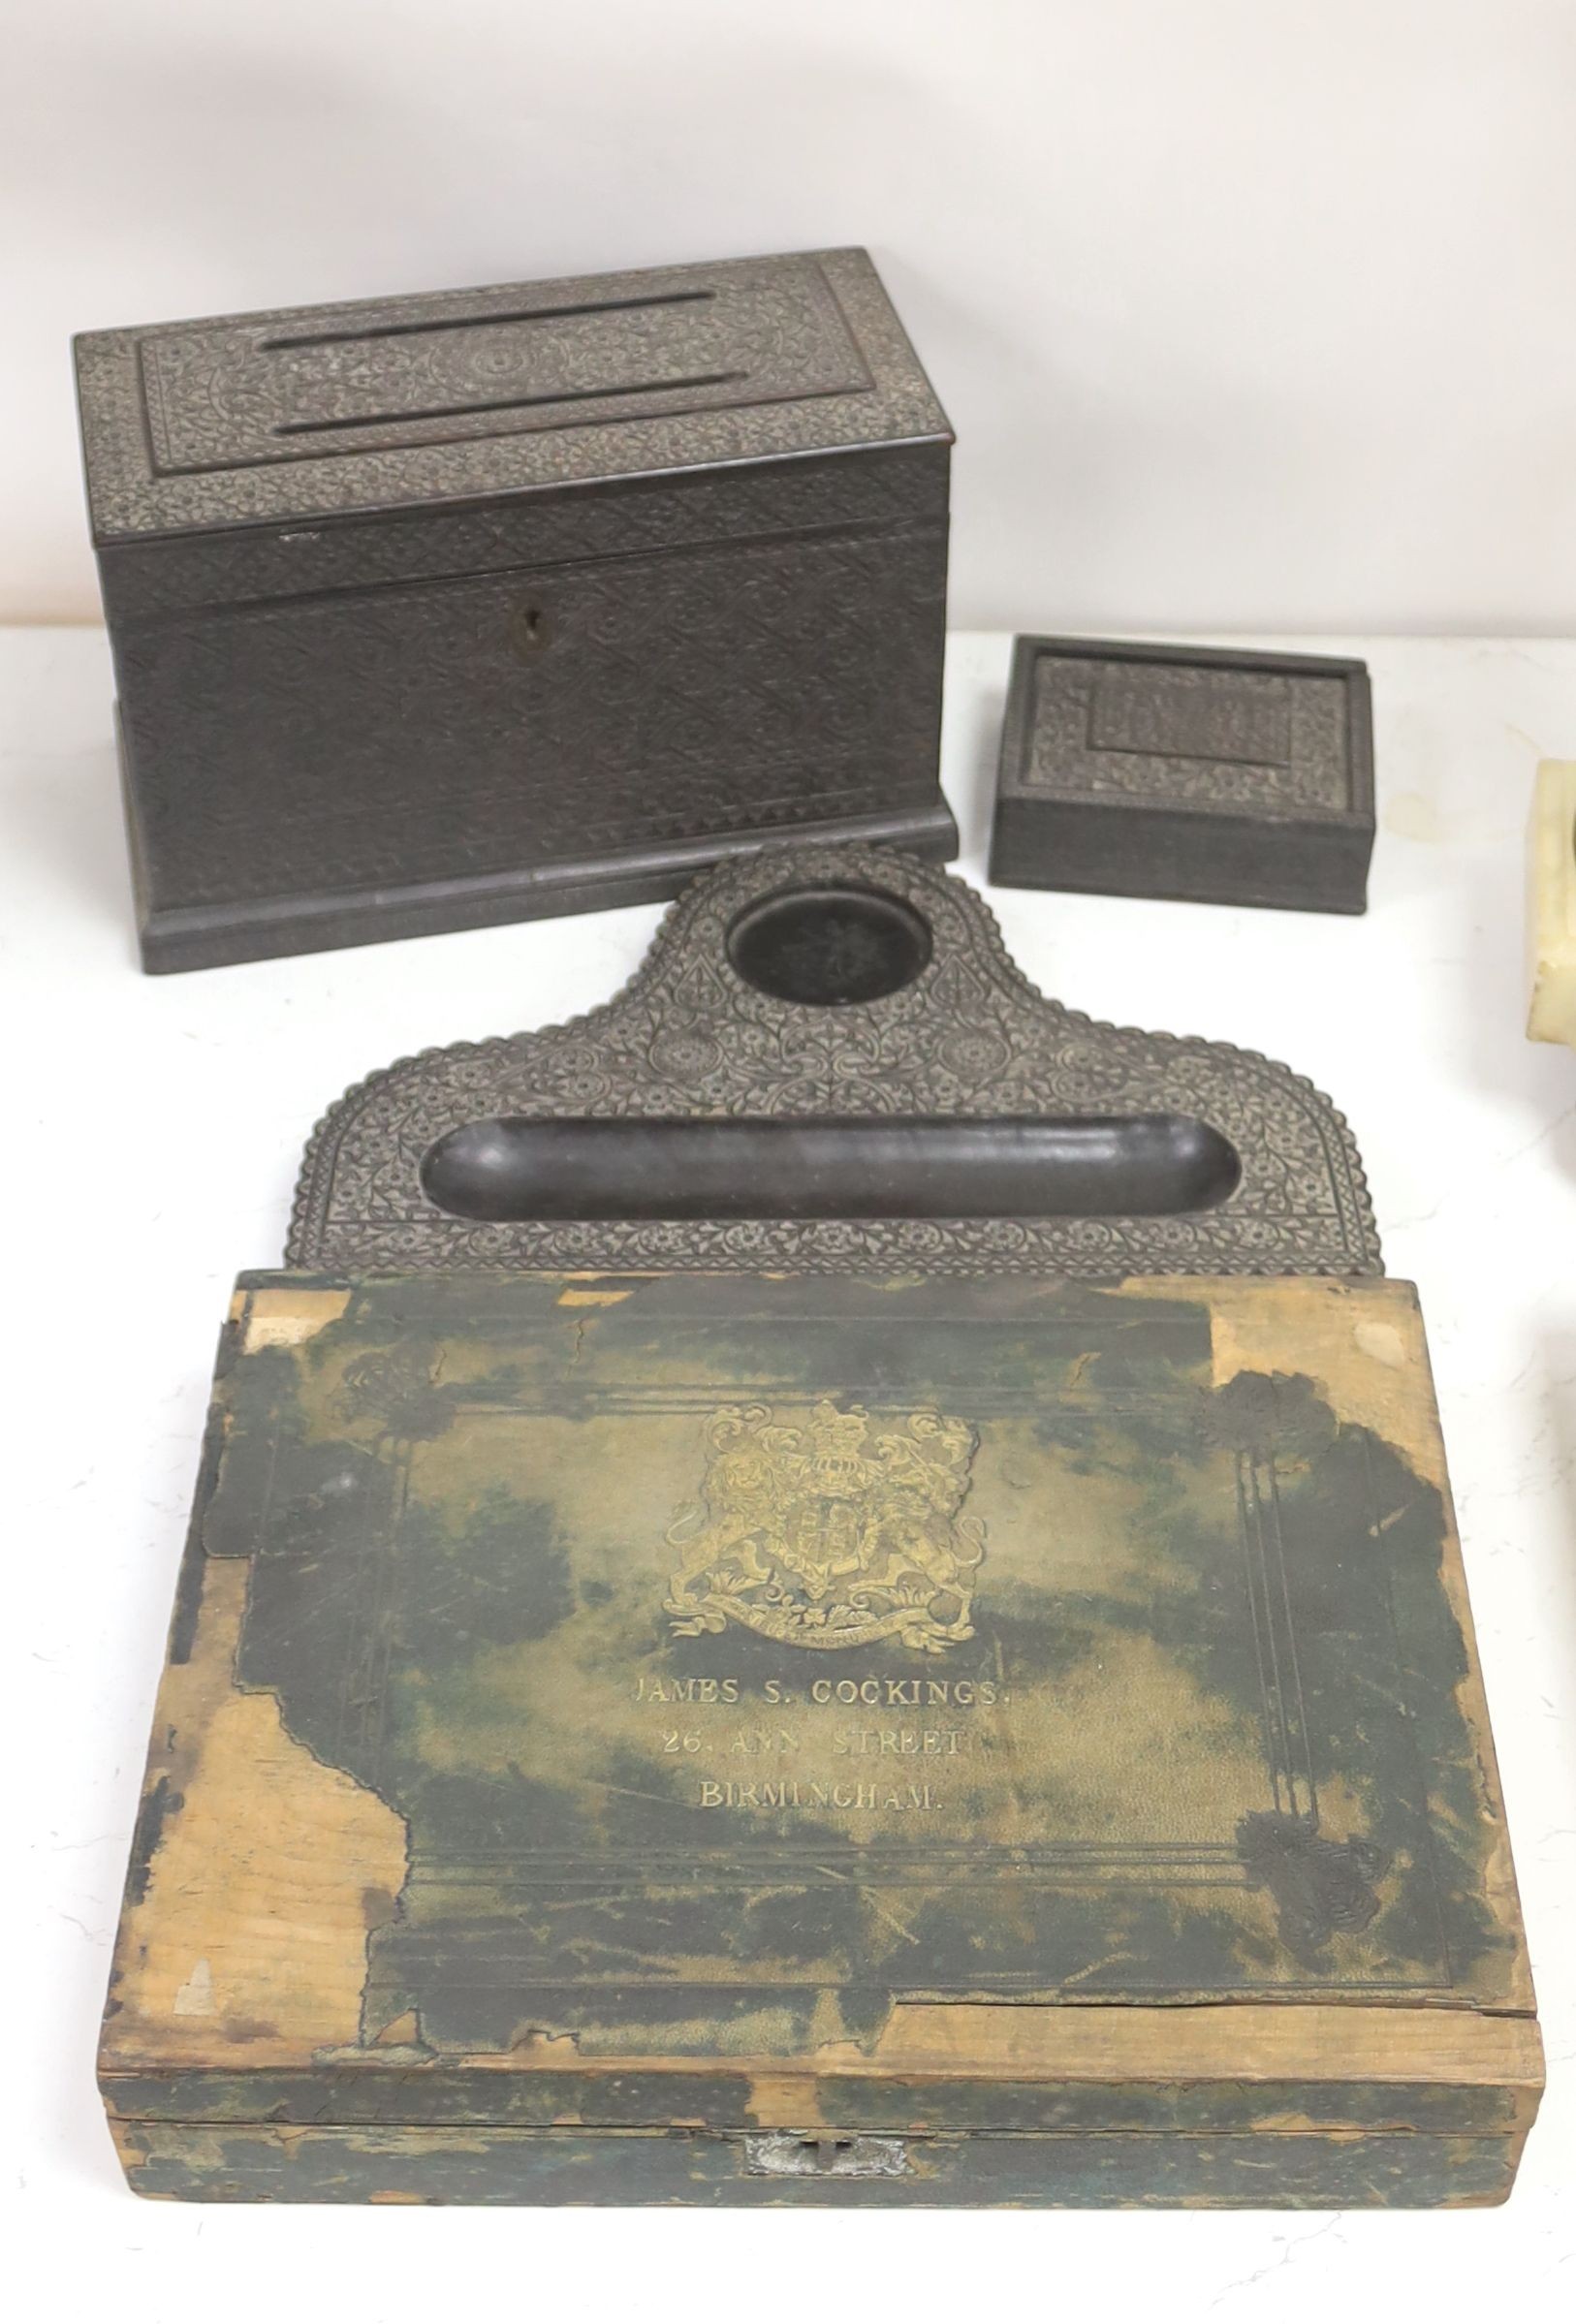 A James Cockings leather box containing a vellum patent letter with Queen Victoria Grand seal with an Indian carved box, pen stand etc